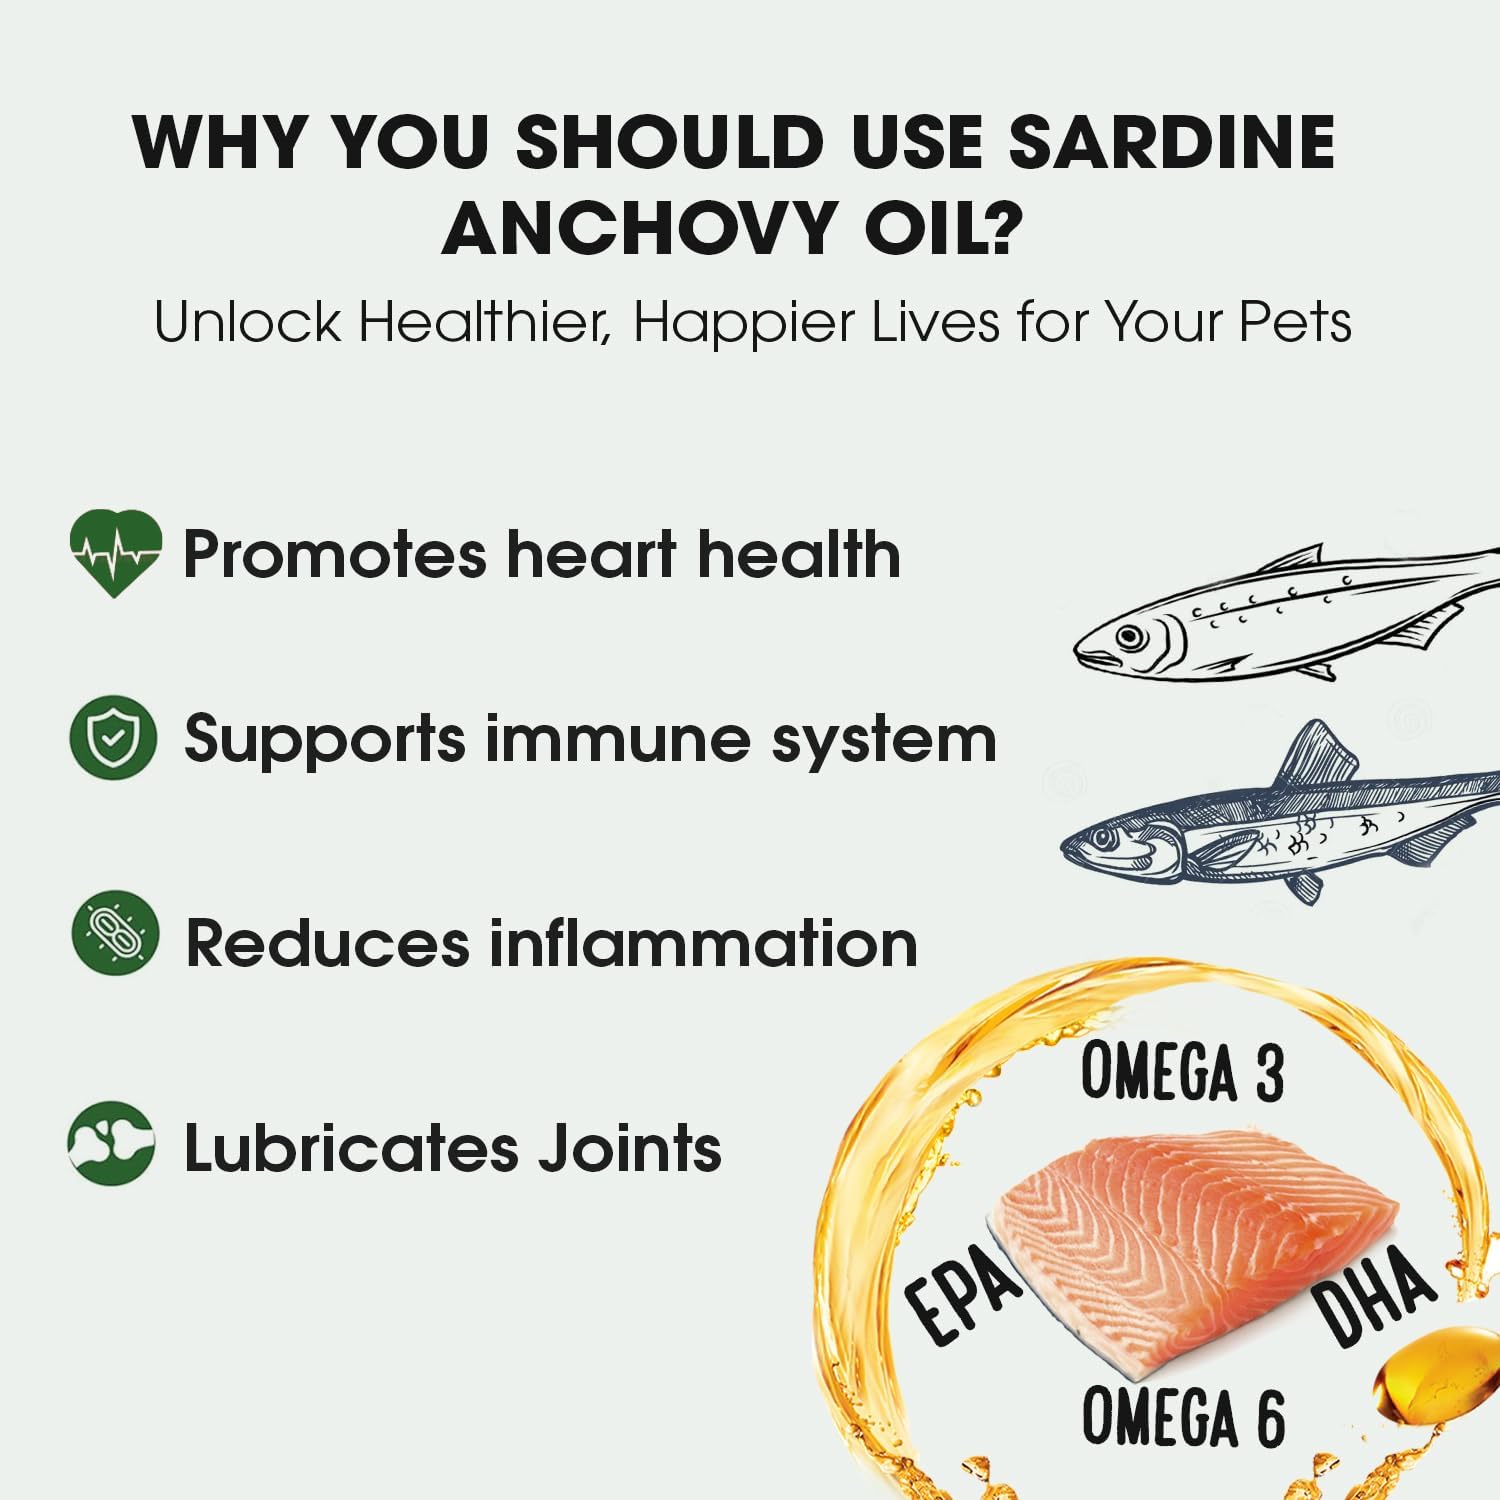 Iceland Pure Sardine Anchovy Oil | Wild Caught | 1597mg of Omega 3 per teaspoon | Unscented Pharmaceutical Grade | For Dogs and Cats | BPA-Free Brushed Aluminum Epoxy coated Bottle with Pump 17oz : Pet Fish Oil Nutritional Supplements : Pet Supplies